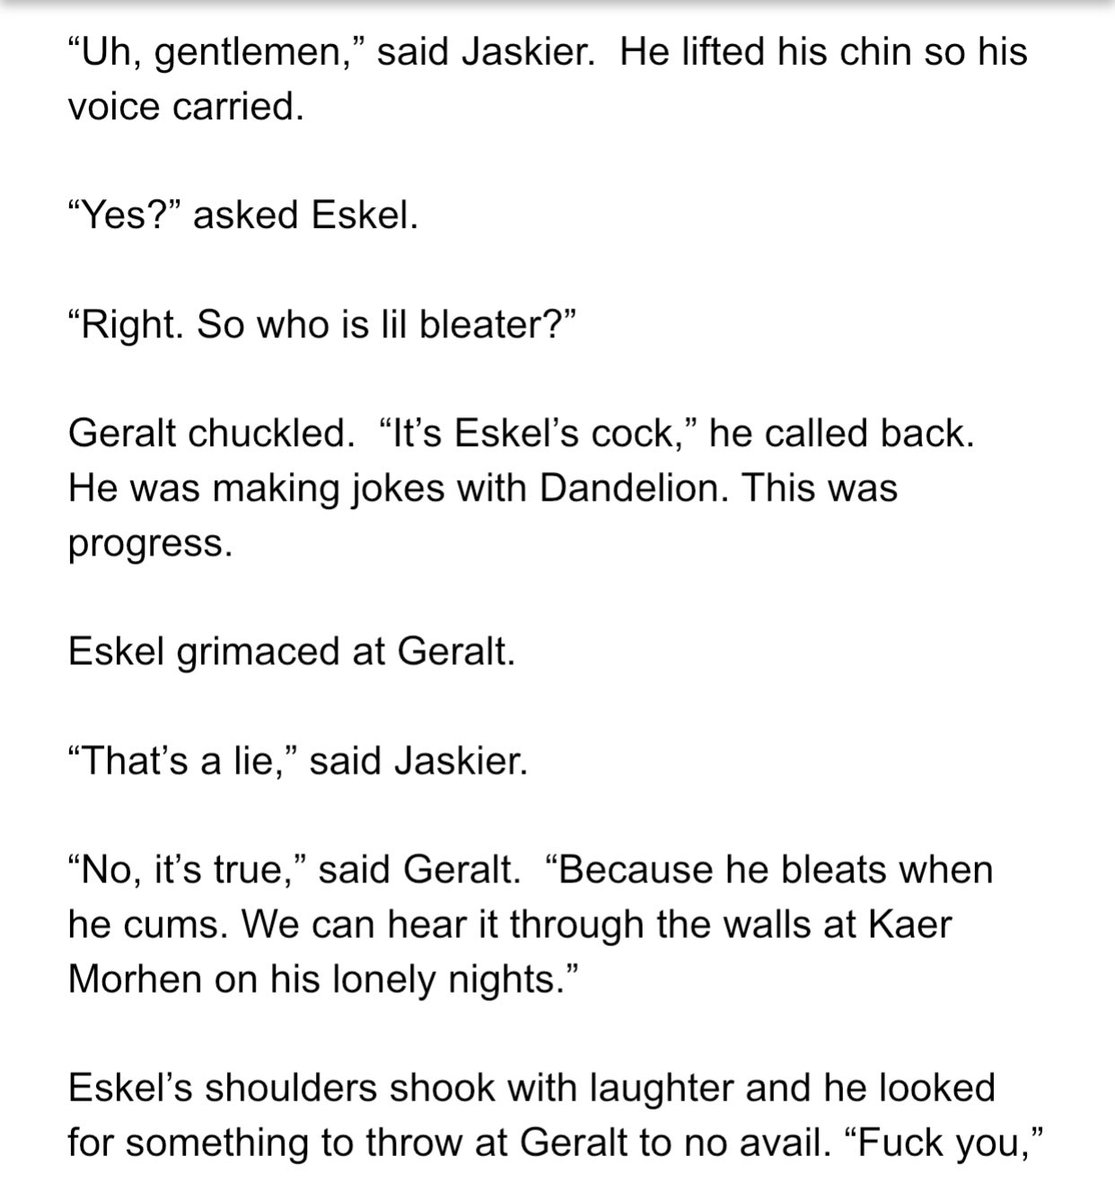 Here’s my next Jaskel / poly witcher Kaer Morhen fic. A juvenile lil Bleater joke between Geralt and Eskel. I may move it to a different chapter but it made me laugh.